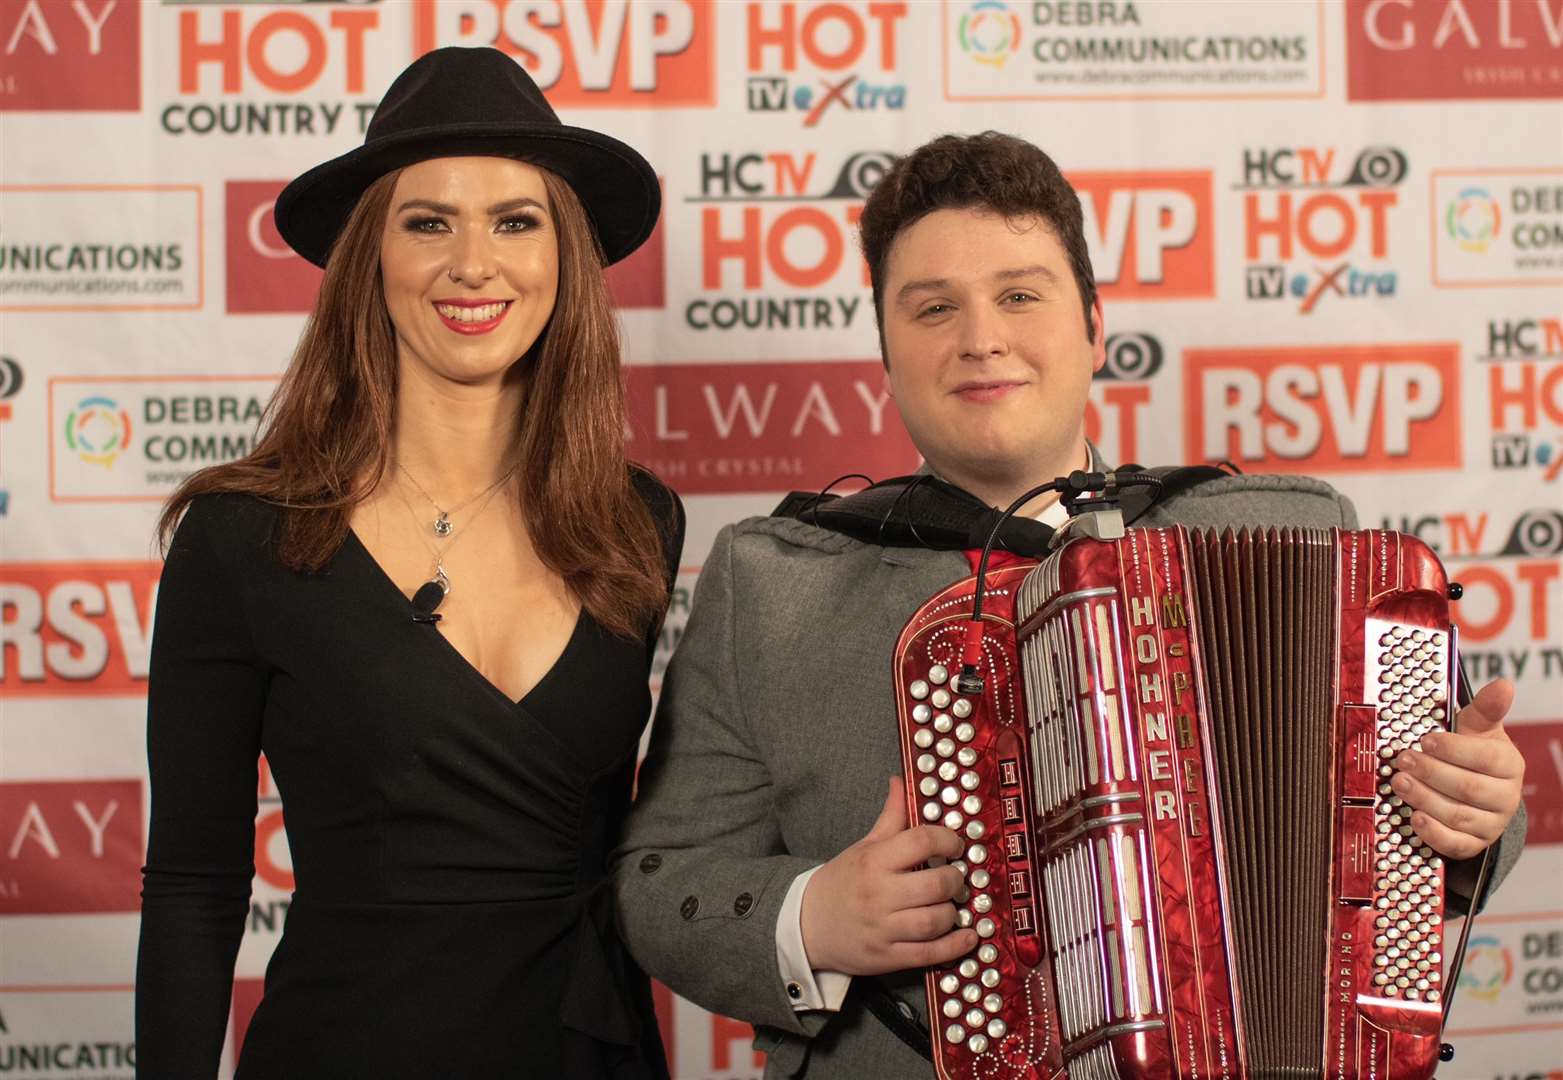 Brandon alongside singer/songwriter Sina Theil at the Hot Country TV awards. Picture: Aisling O'Leary